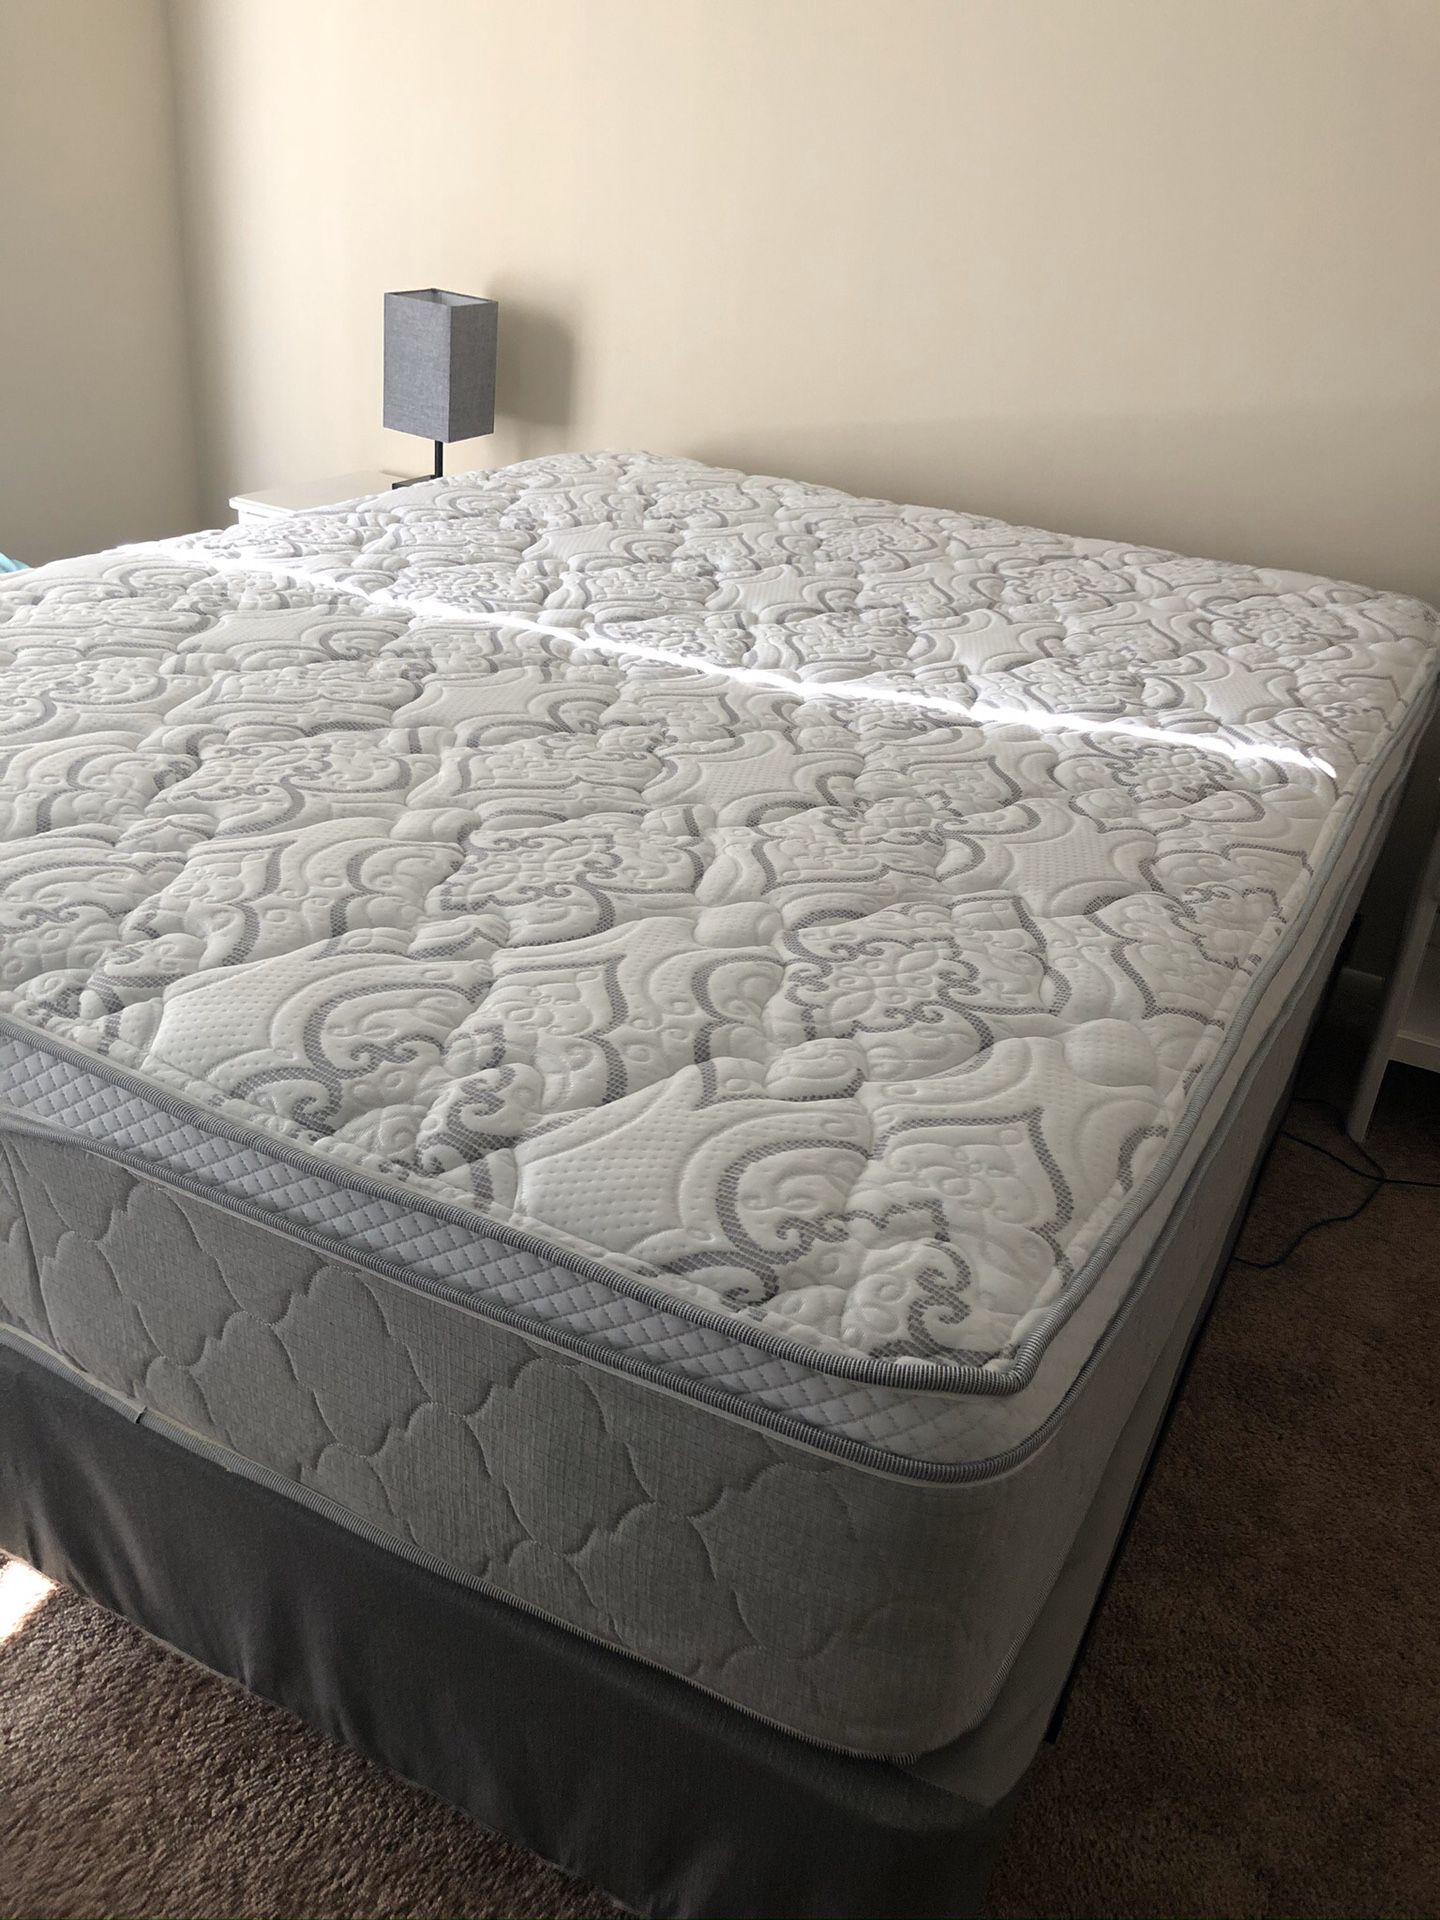 Brand new queen bed - mattress, box spring, and metal frame